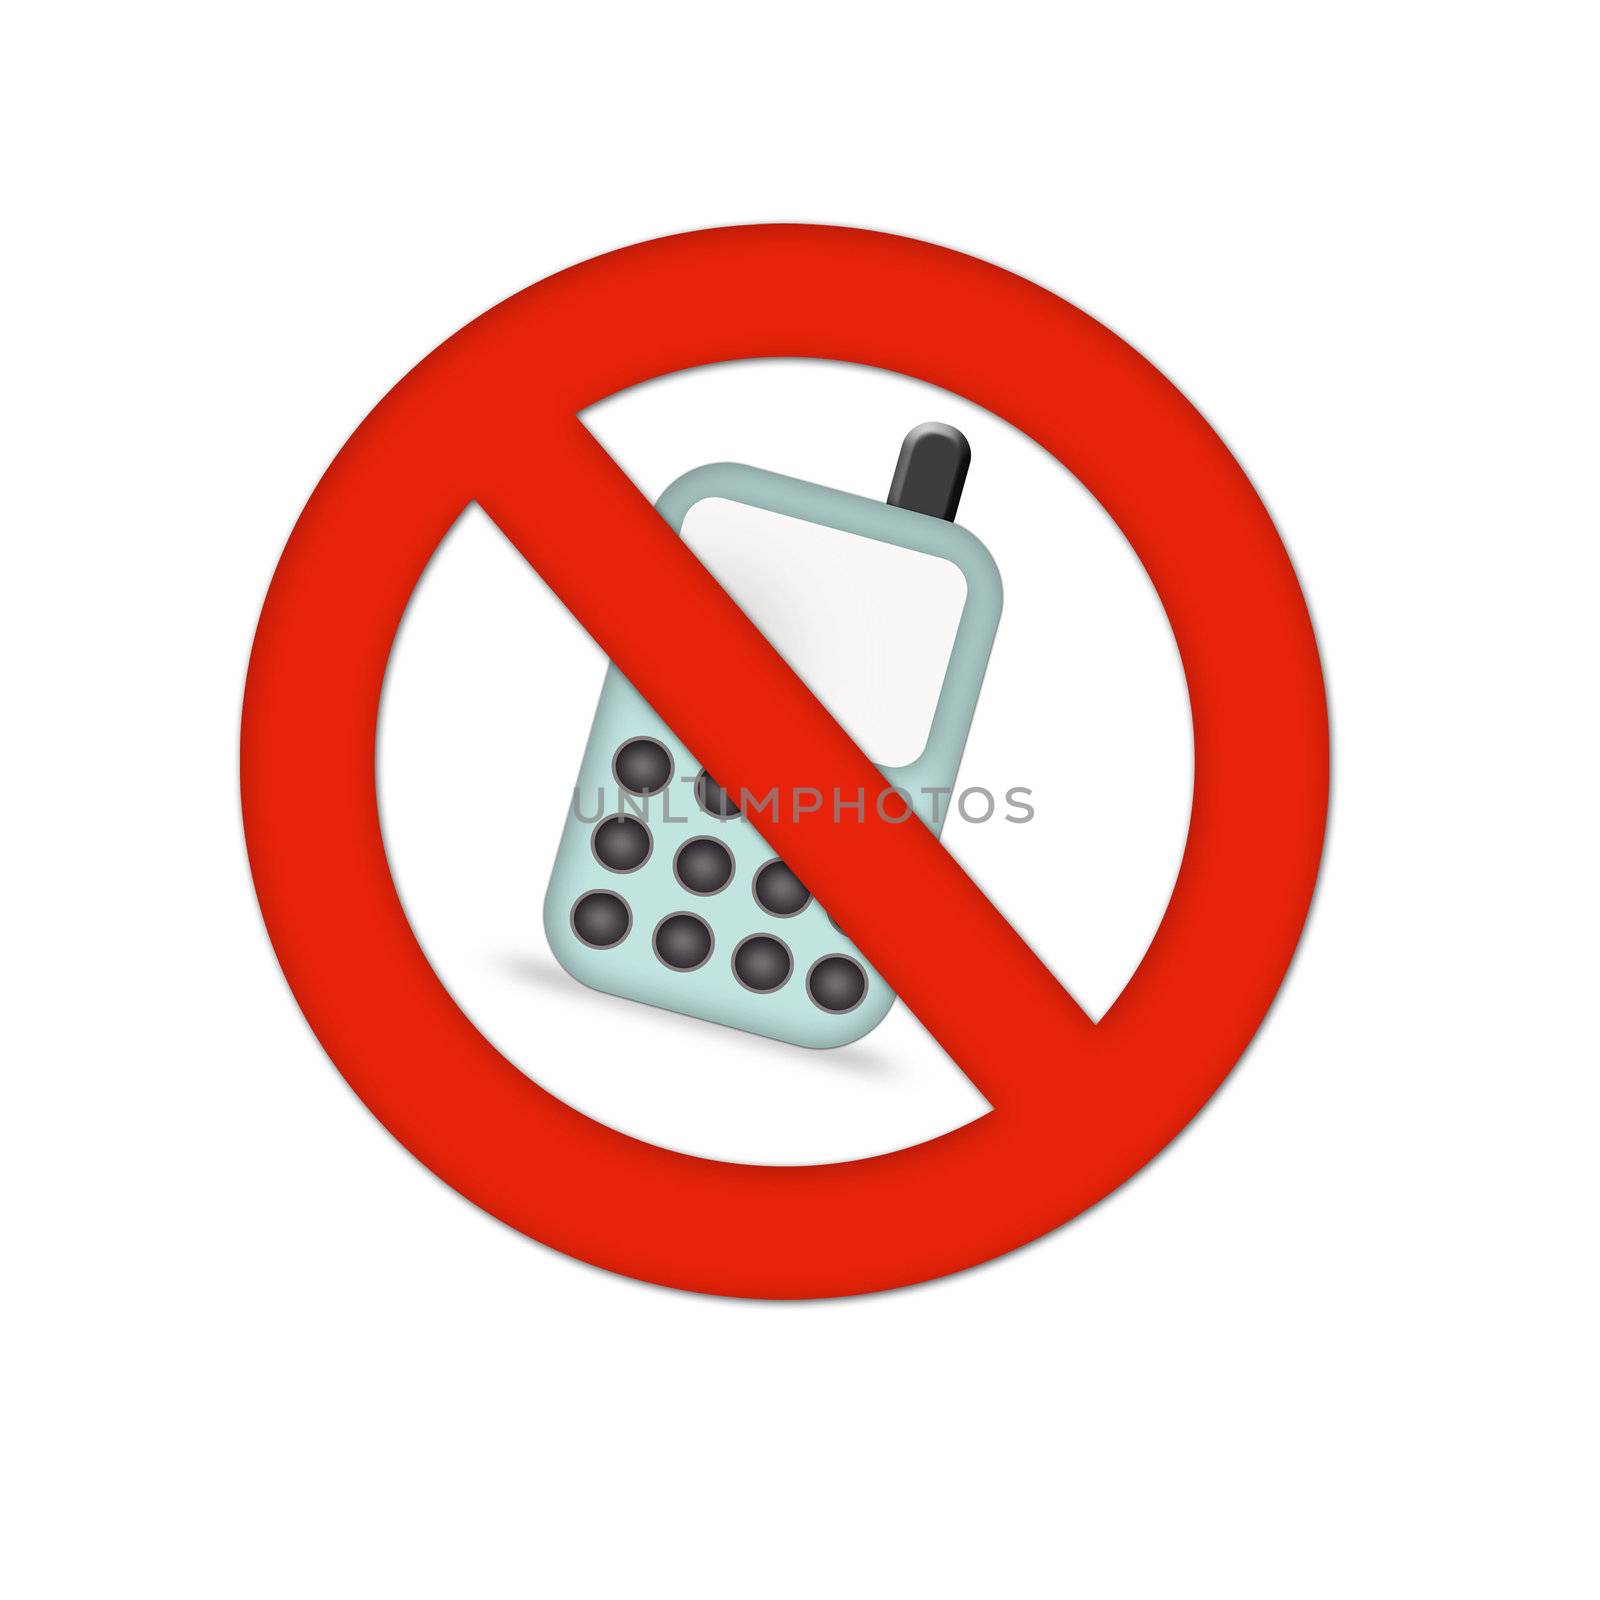 mobiles not allowed by shawlinmohd